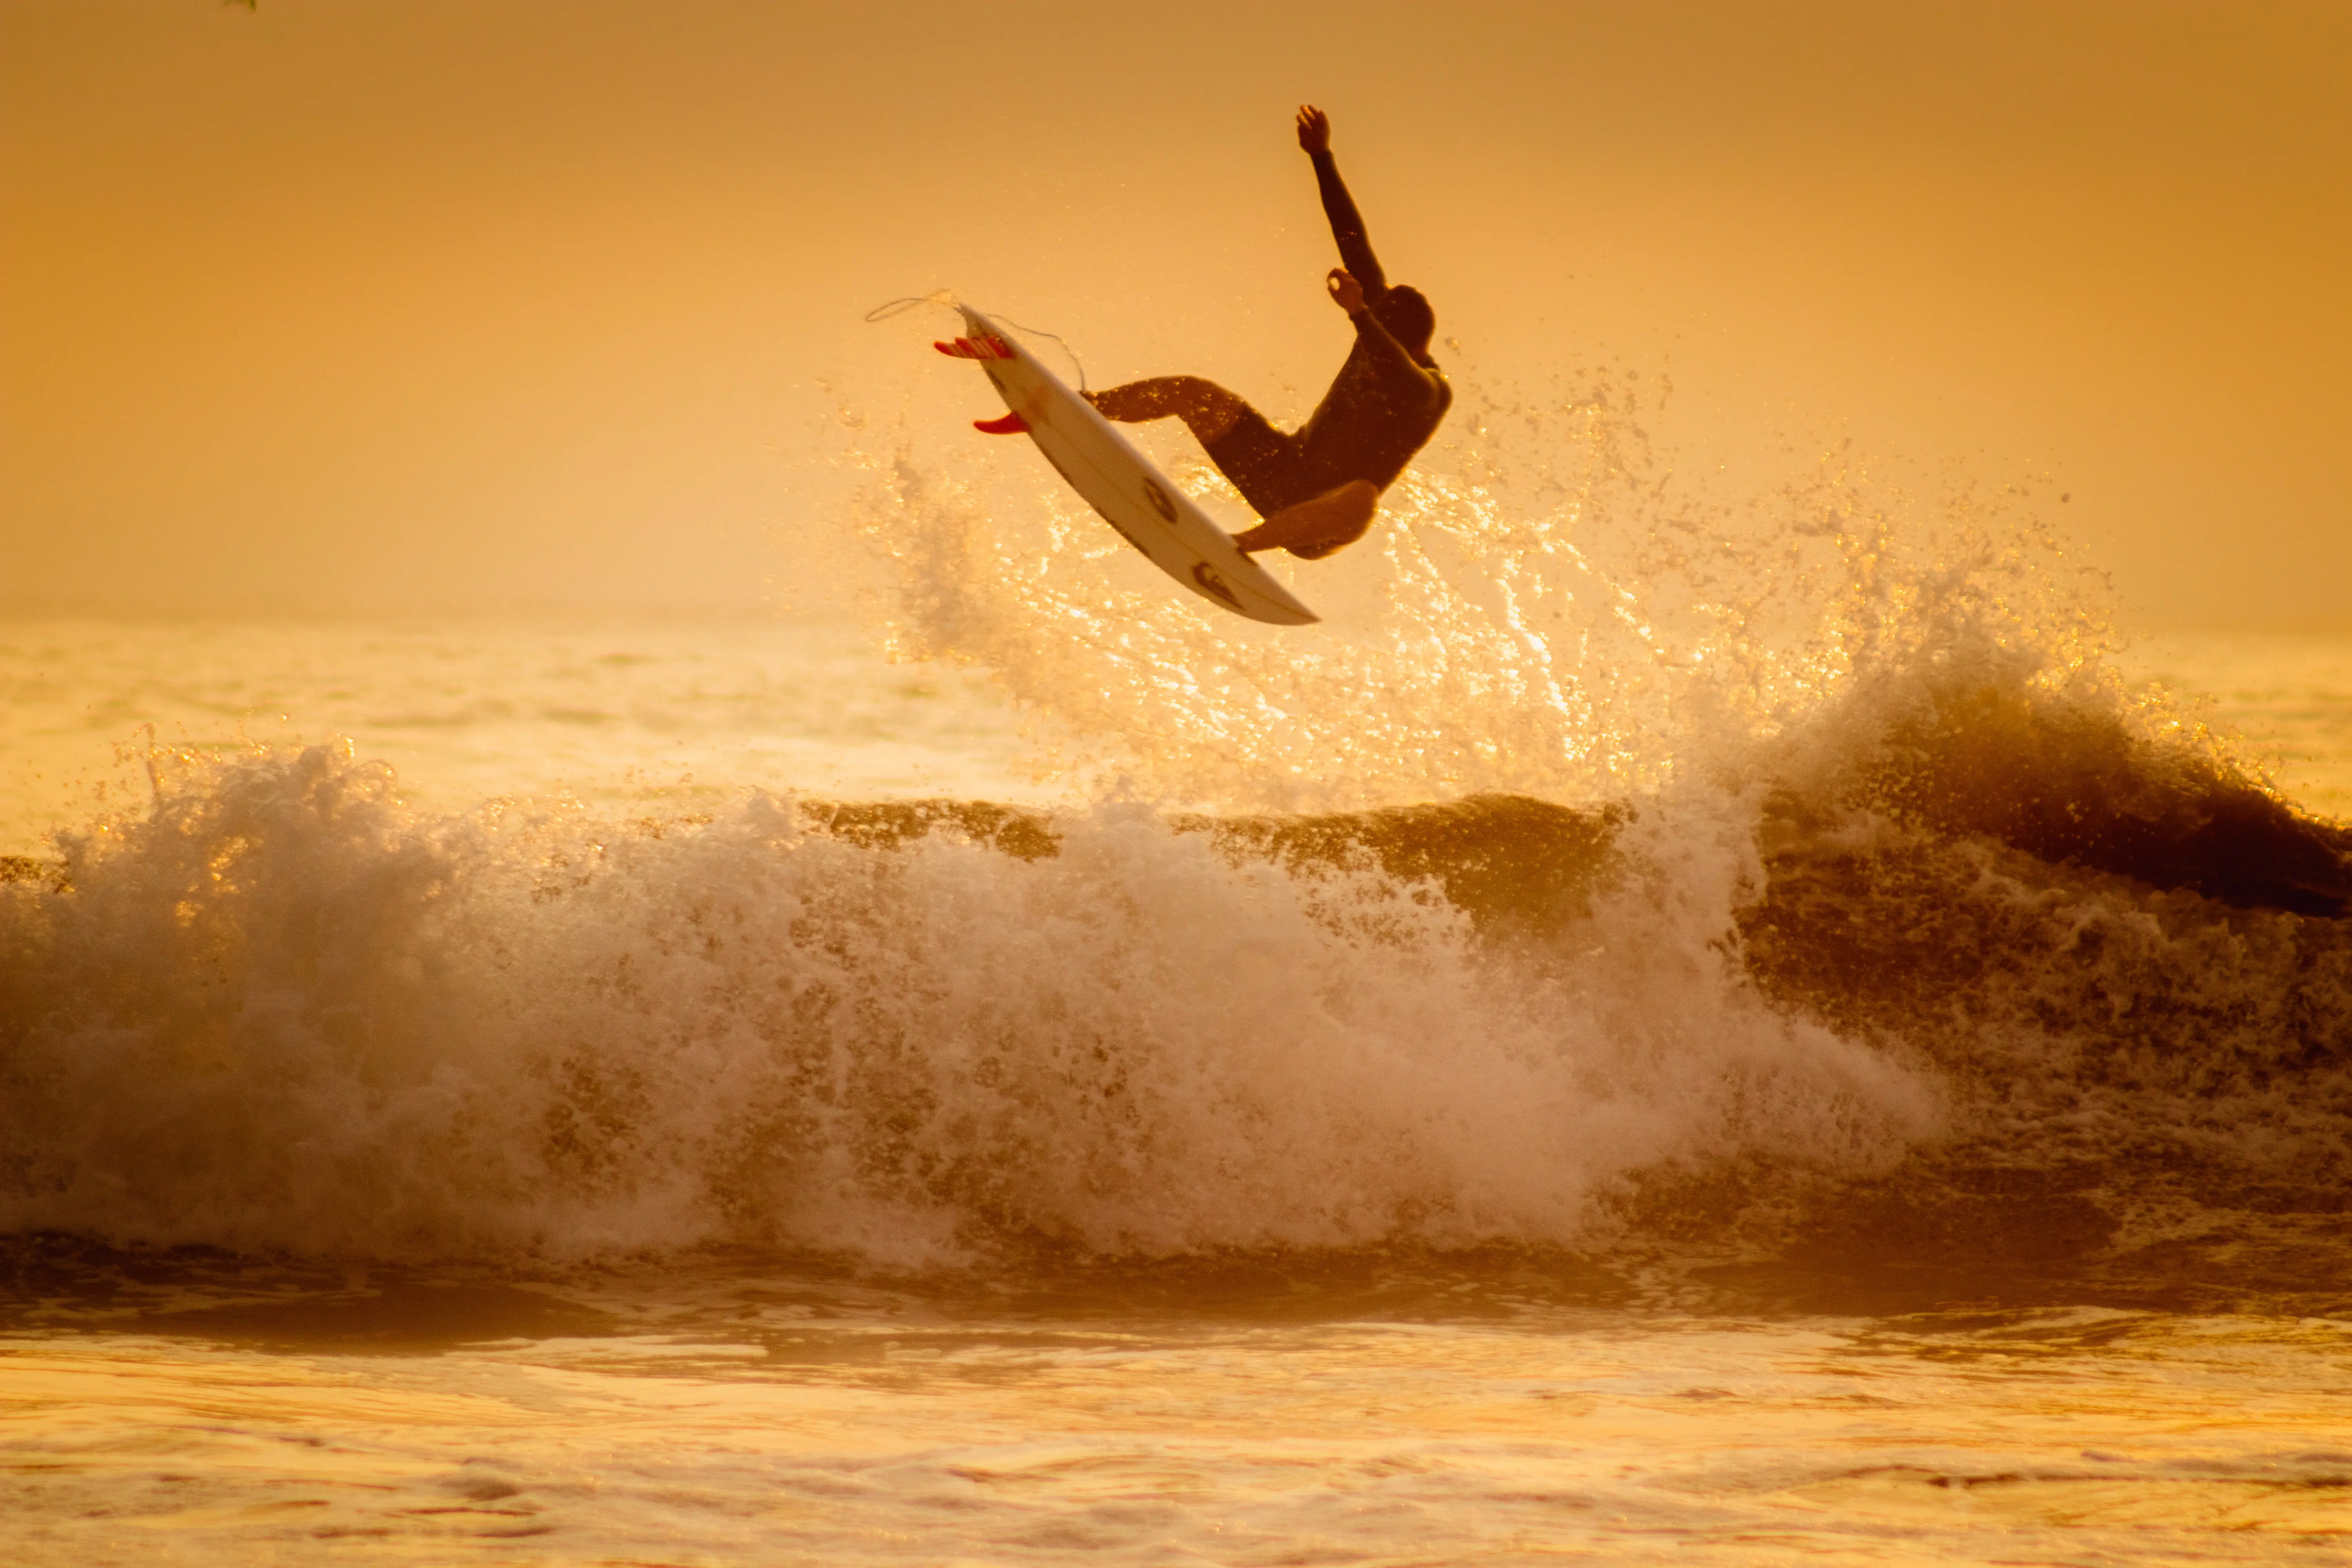 sepia photo of a surfer maneuvering in the air over a wave